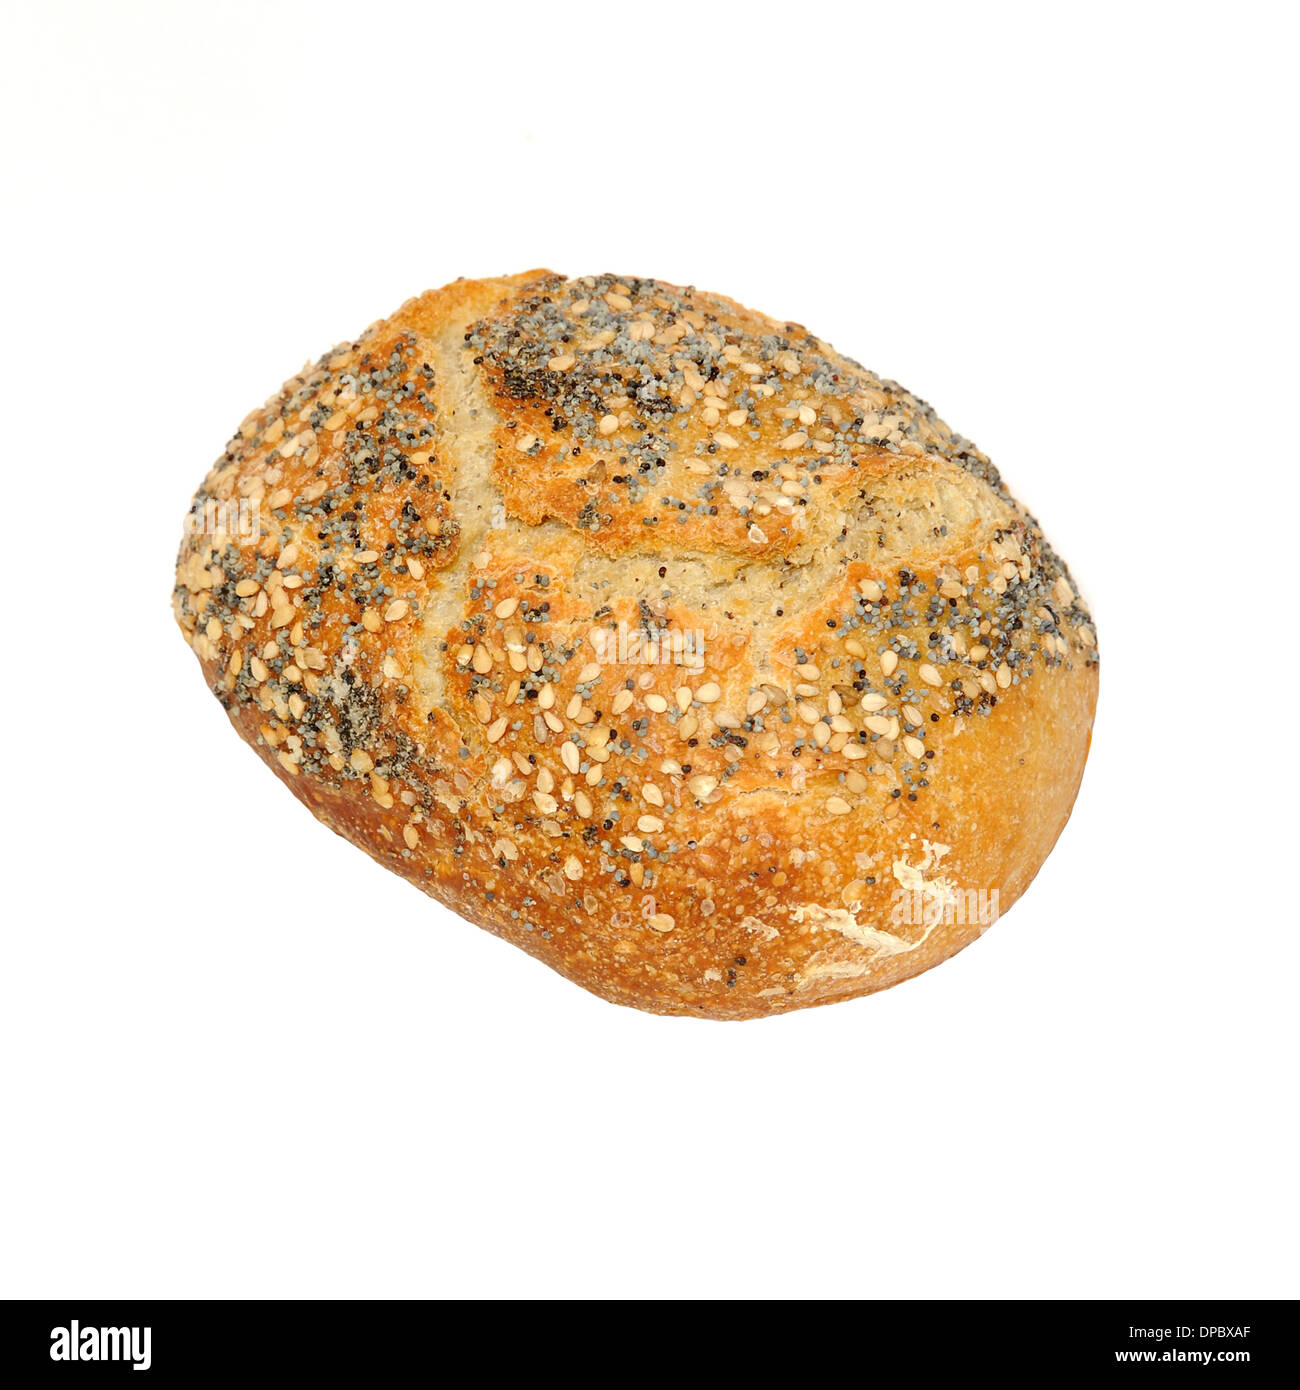 Sesame and poppy seeds Bread on white background. Stock Photo